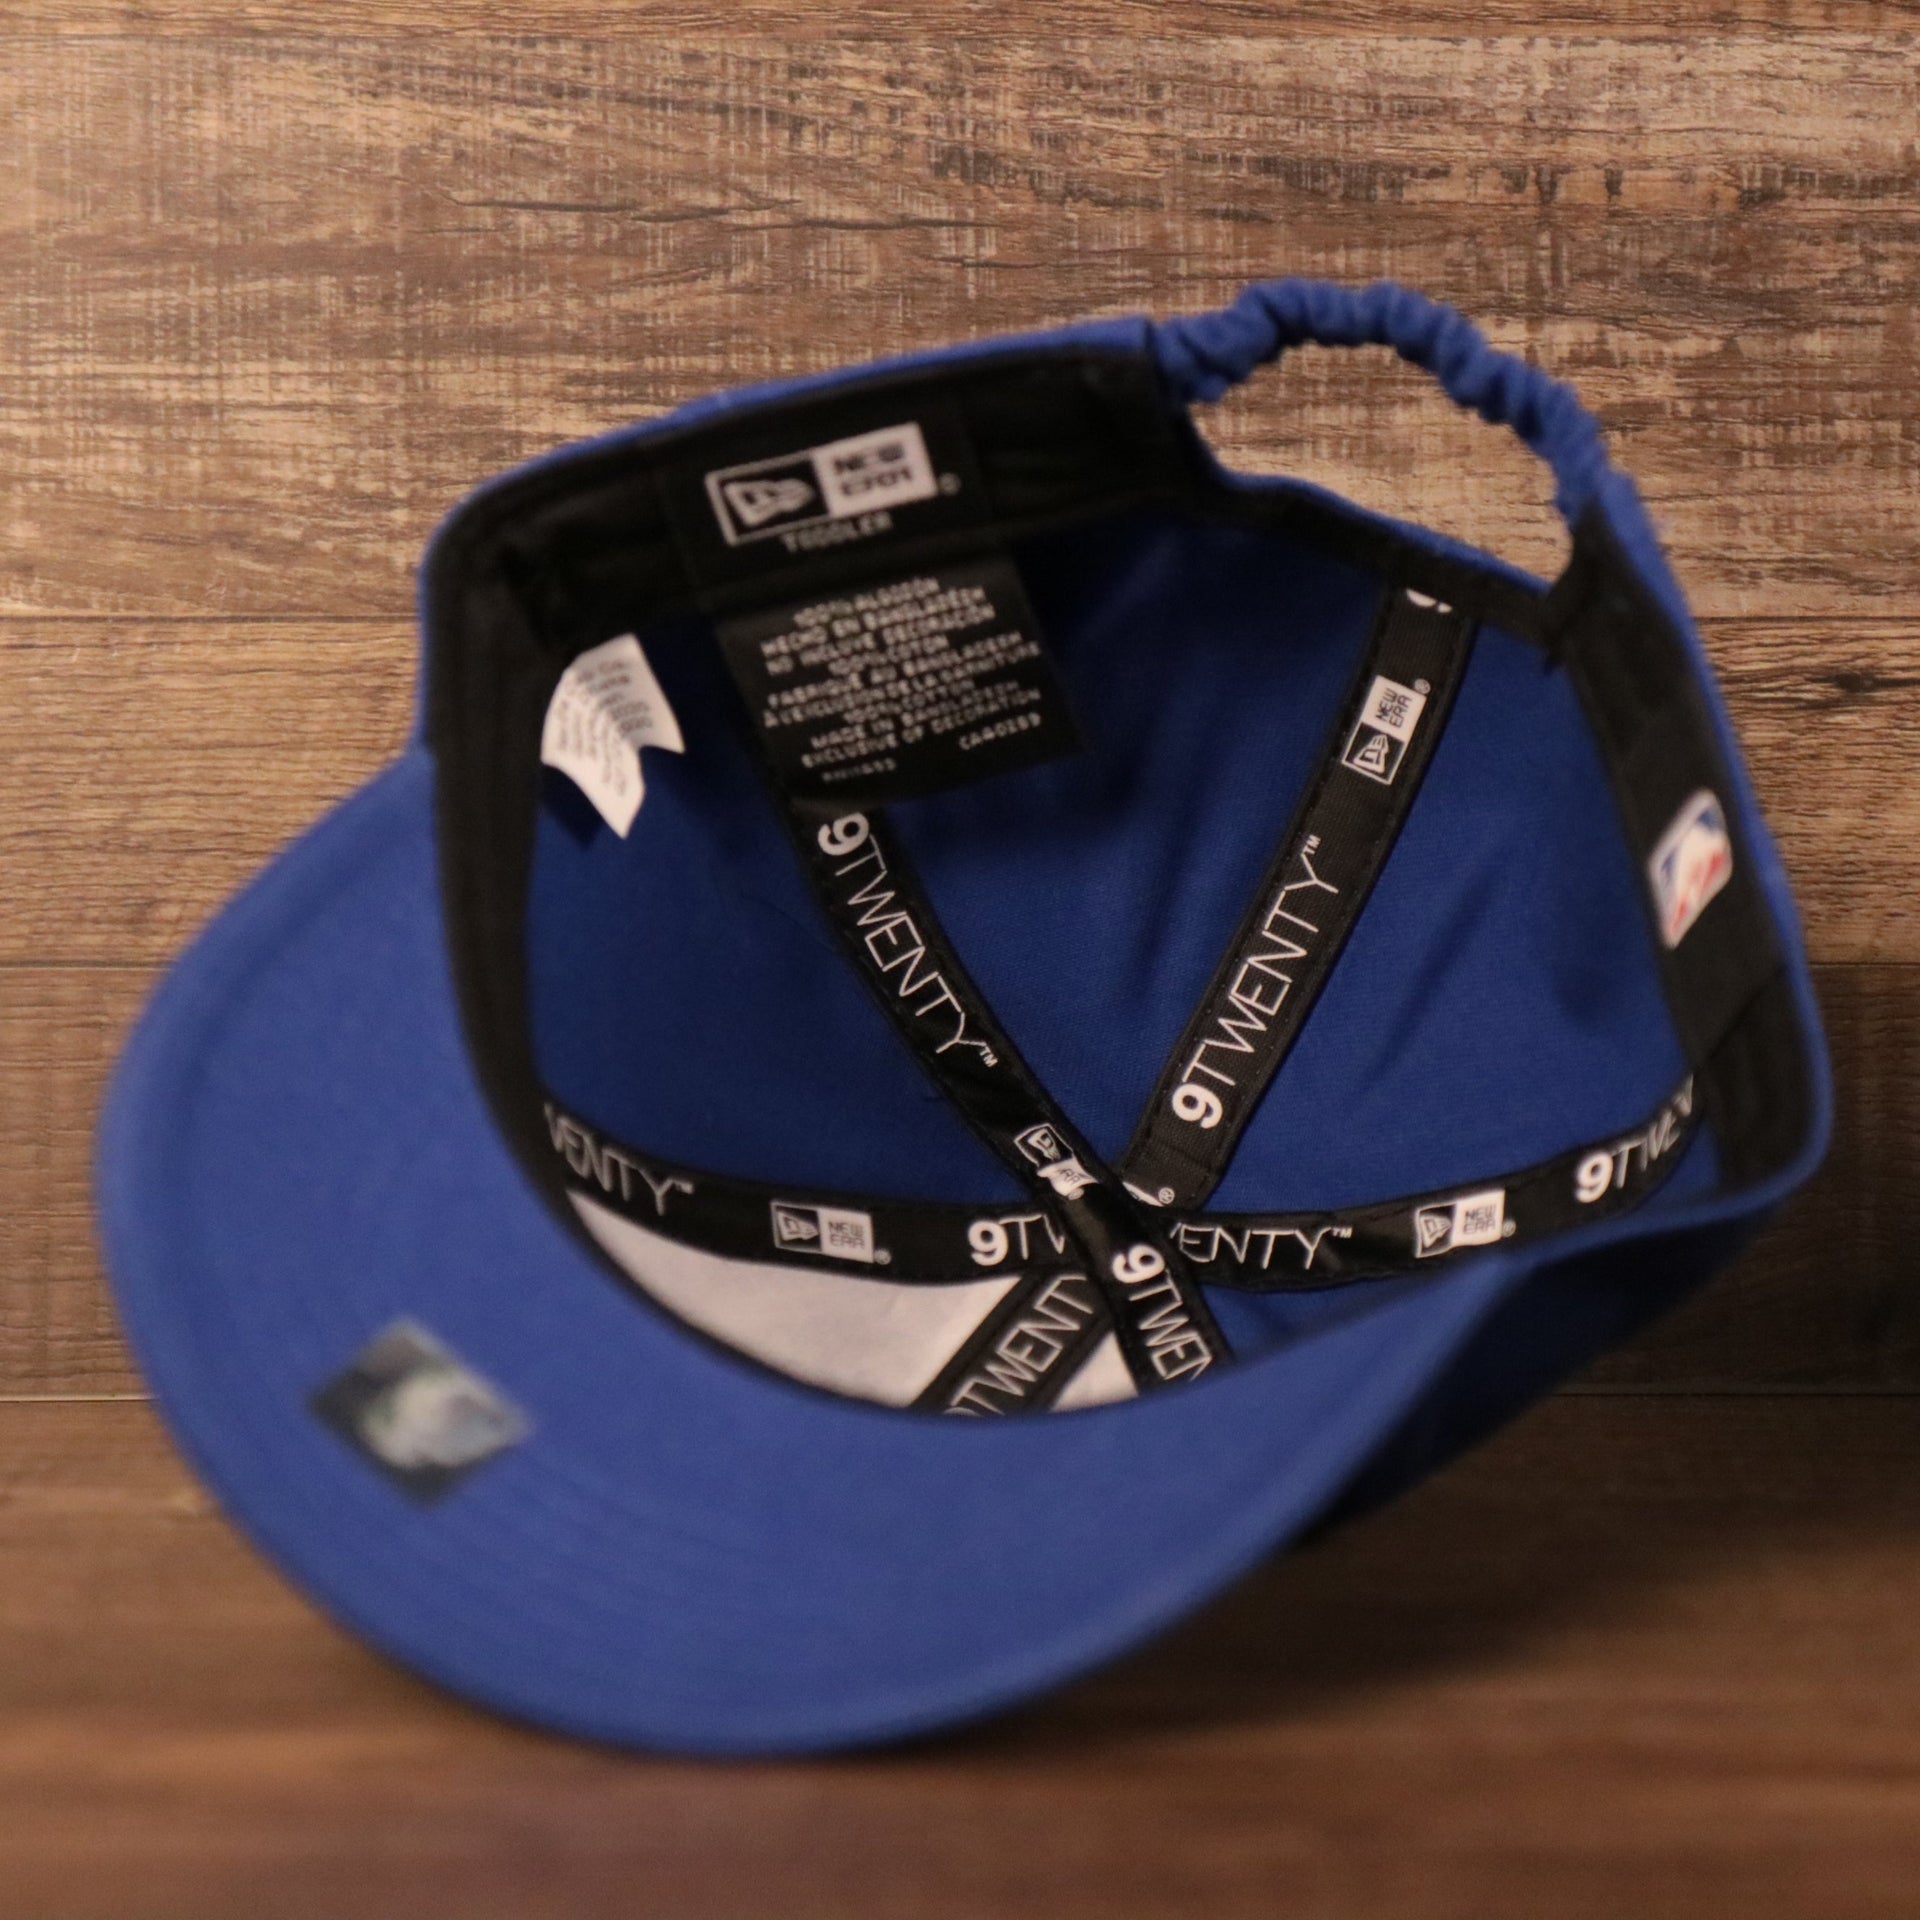 An inside view of the crown of the royal blue infant baseball cap for the Philadelphia 76ers.